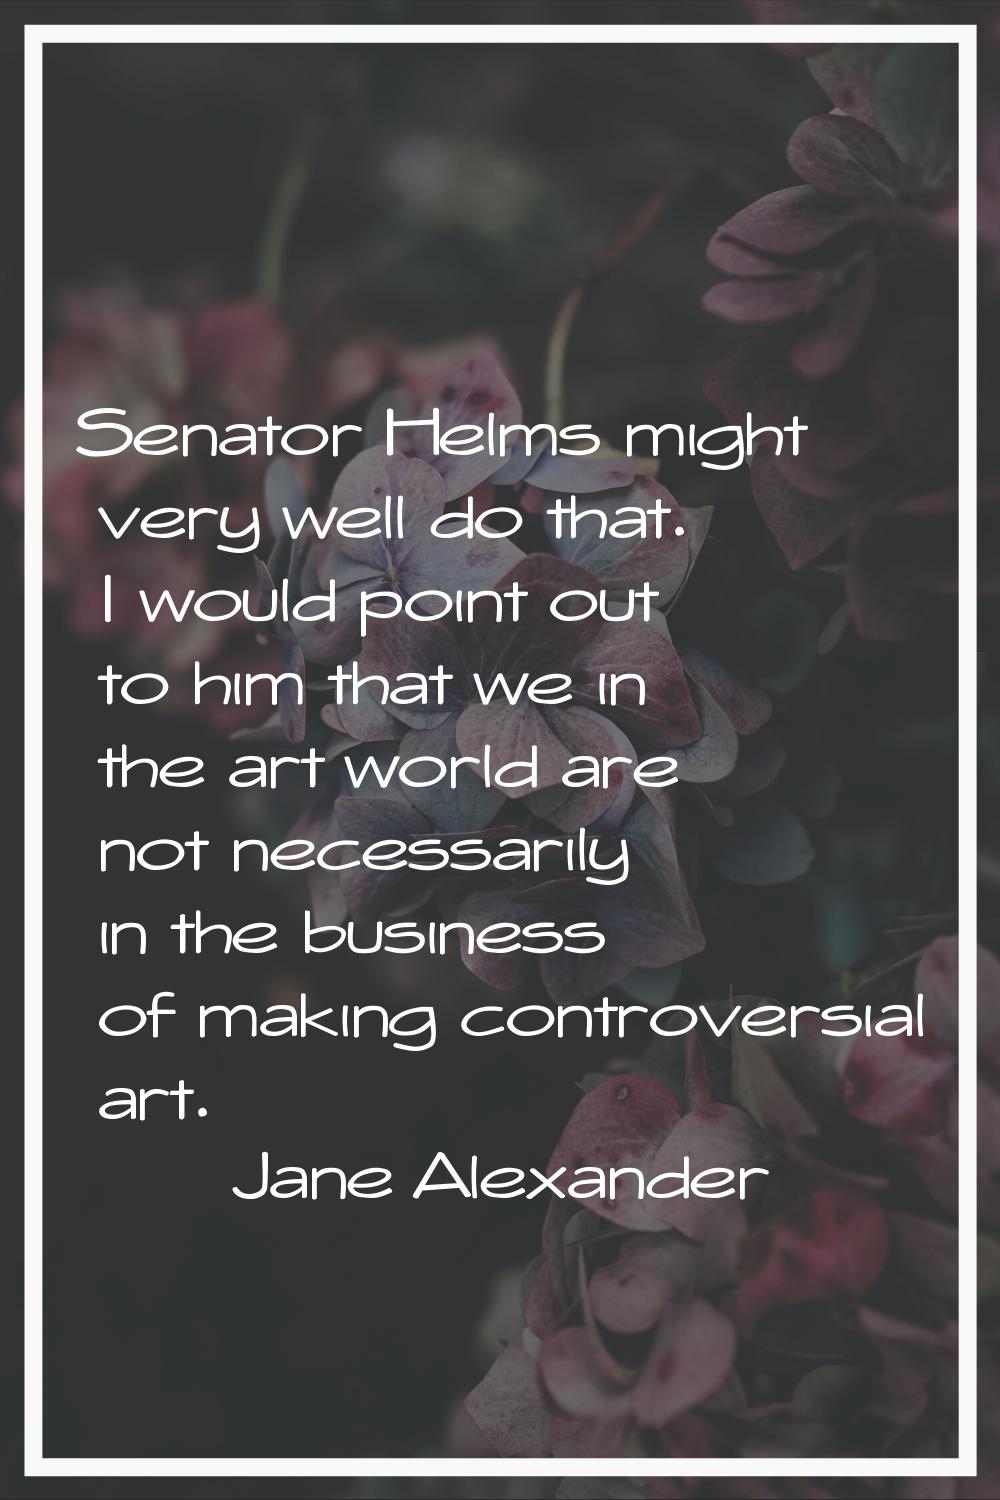 Senator Helms might very well do that. I would point out to him that we in the art world are not ne